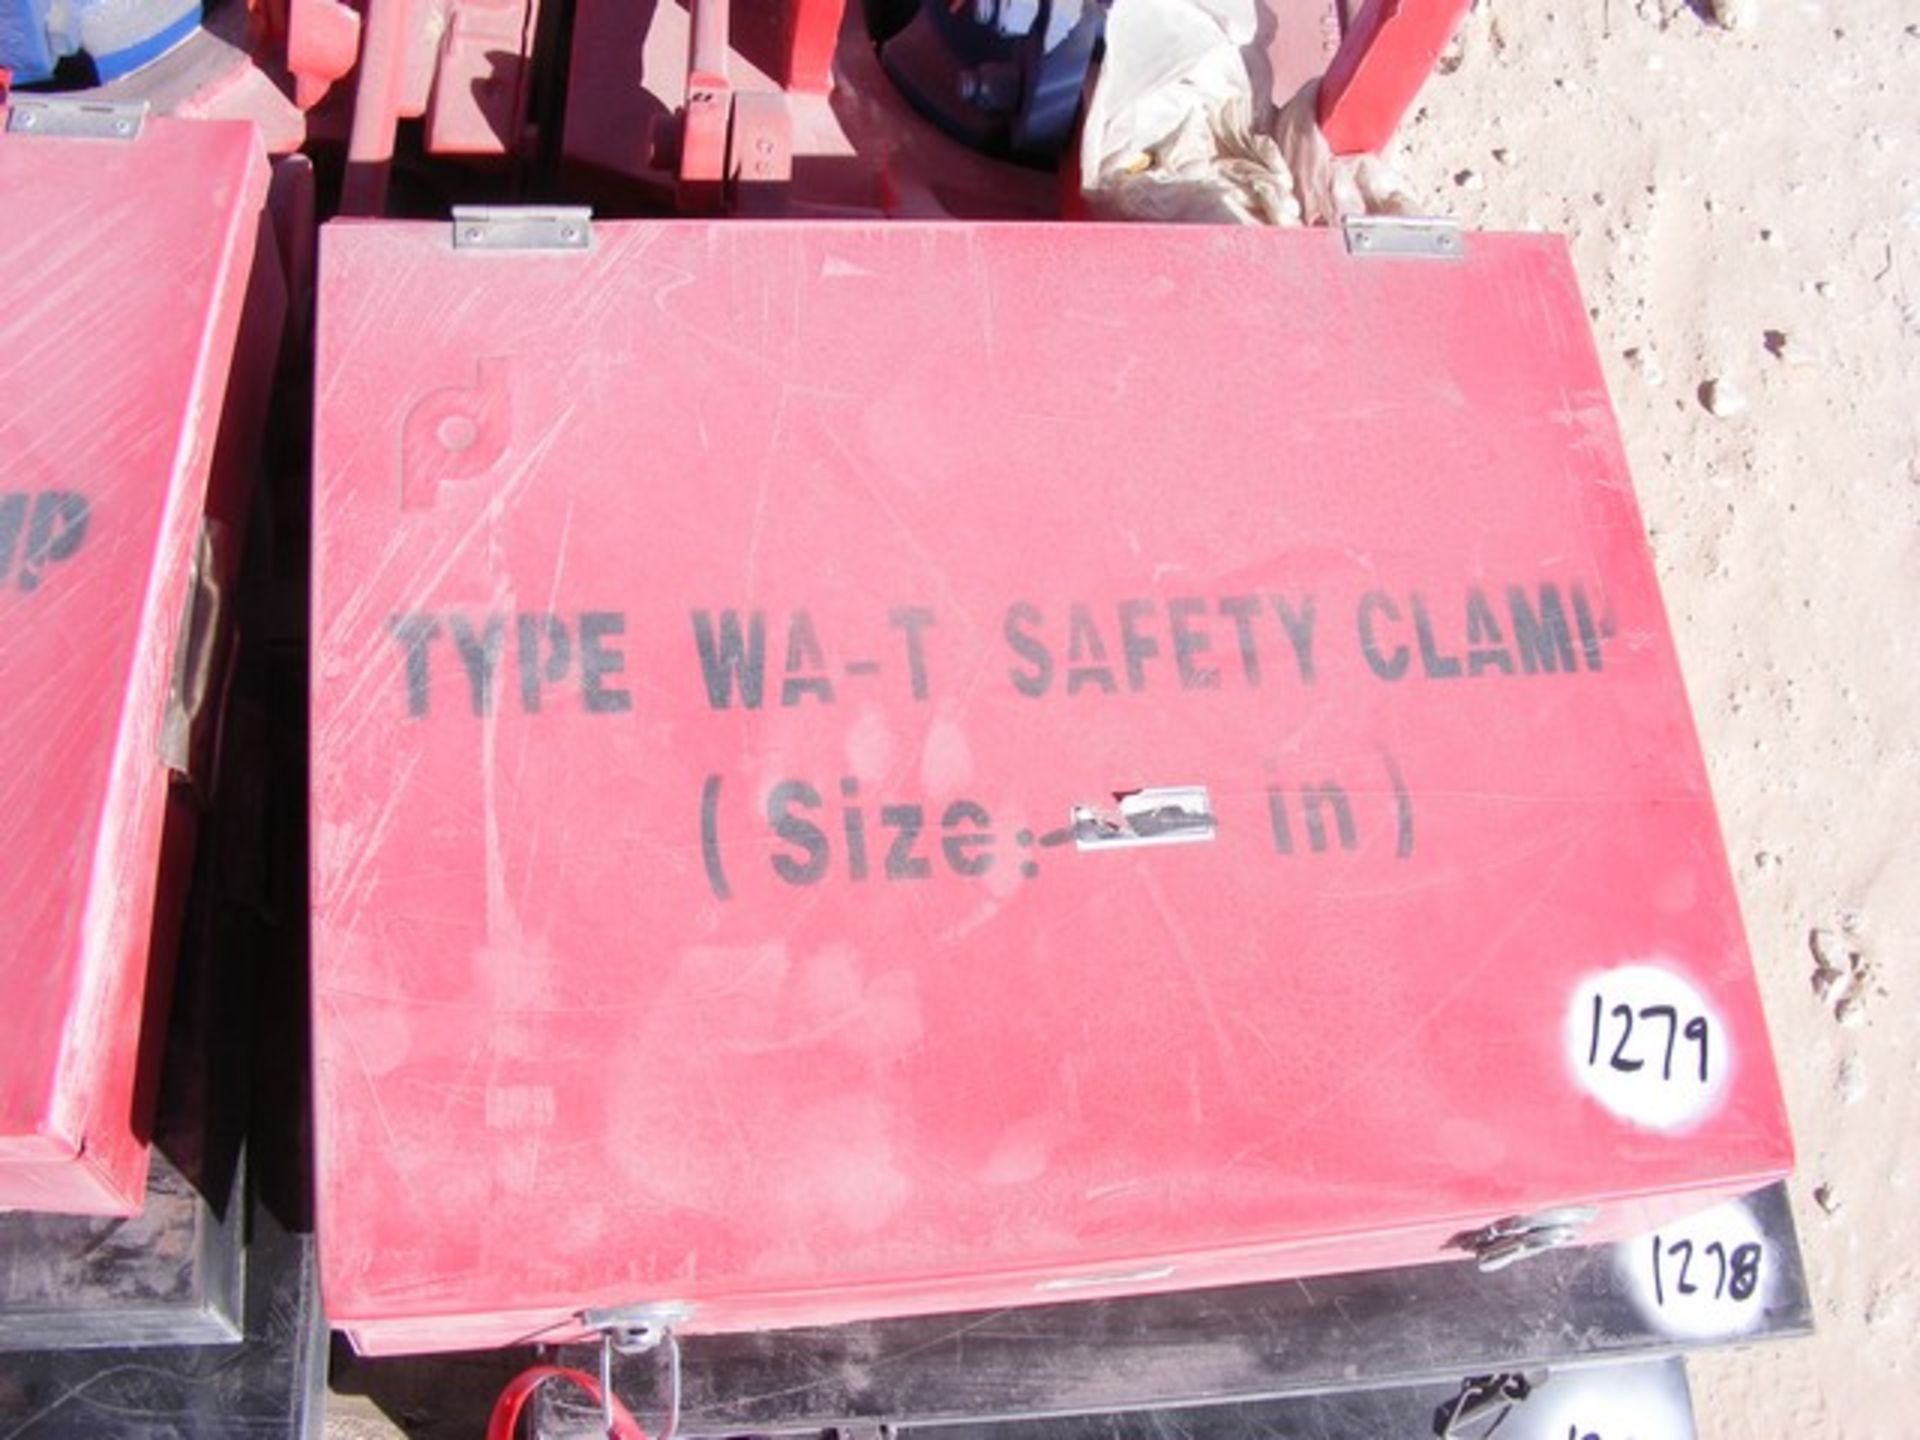 Located in YARD 1 - Midland, TX (6073) (2) TYPE T DRILL COLLAR SAFETY CLAMPS, 6 SEG, 3-1/4" - 4-1/